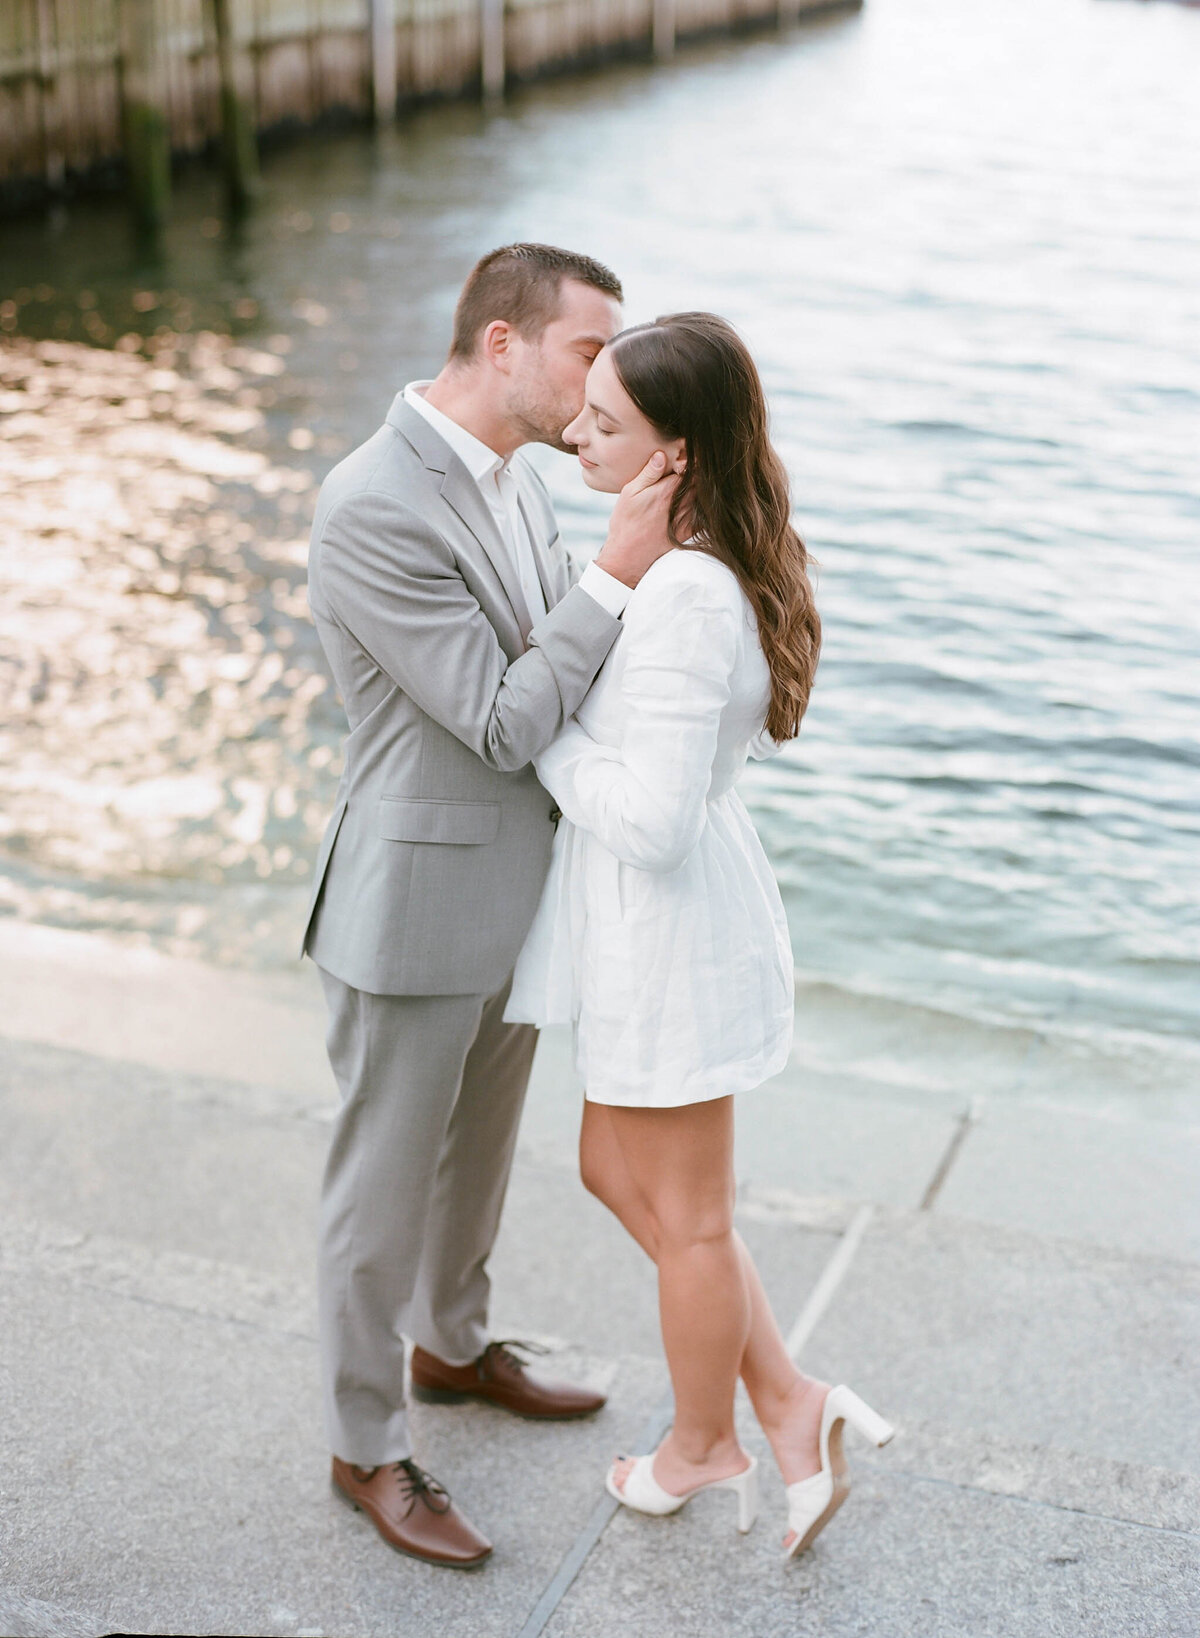 Jacqueline Anne Photography - Halifax Wedding Photographer - Downtown Engagement - Adam and Nicole-50